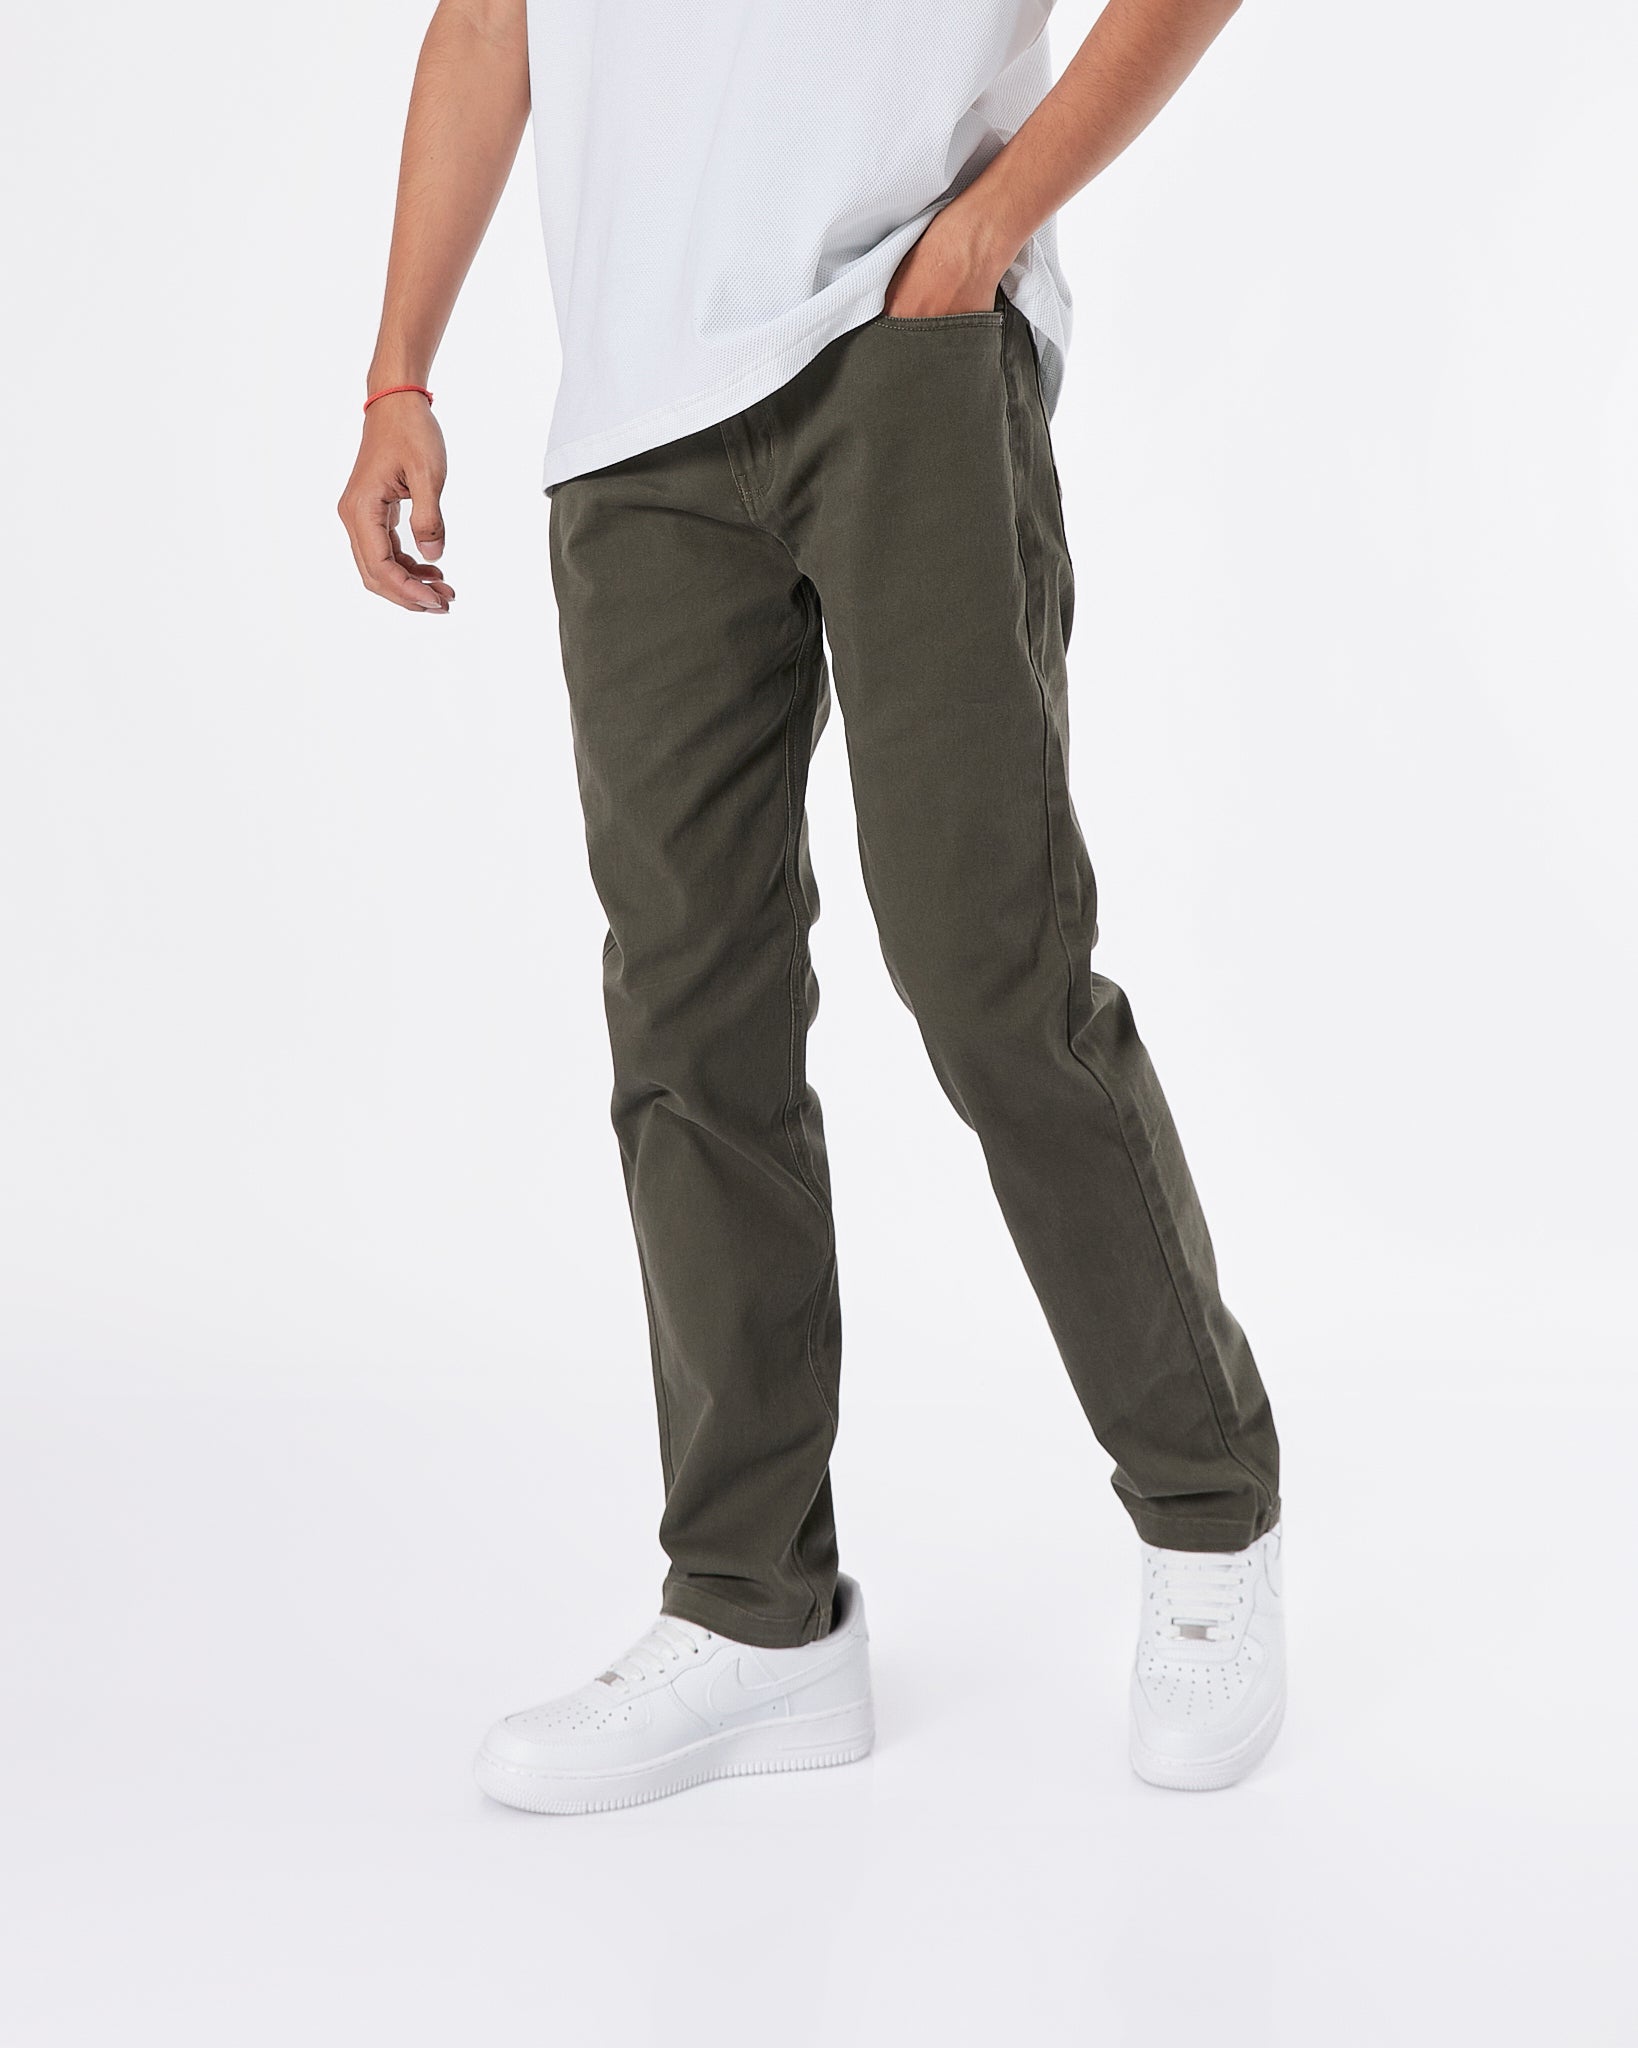 LAC Stretchy Men Green Casual Fit Jeans 24.90